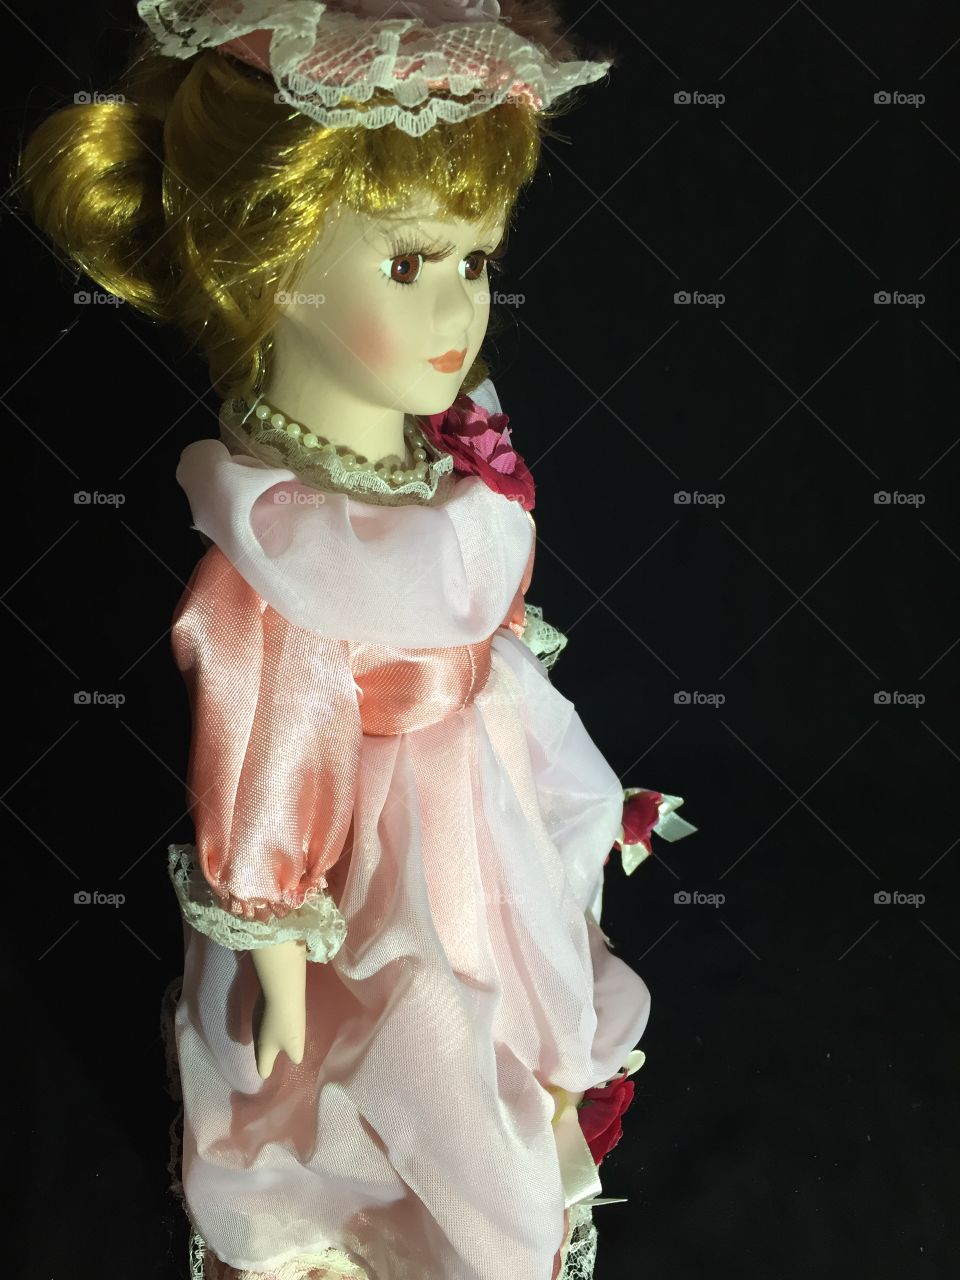 A sharp look from a doll toy isolated on a black background 